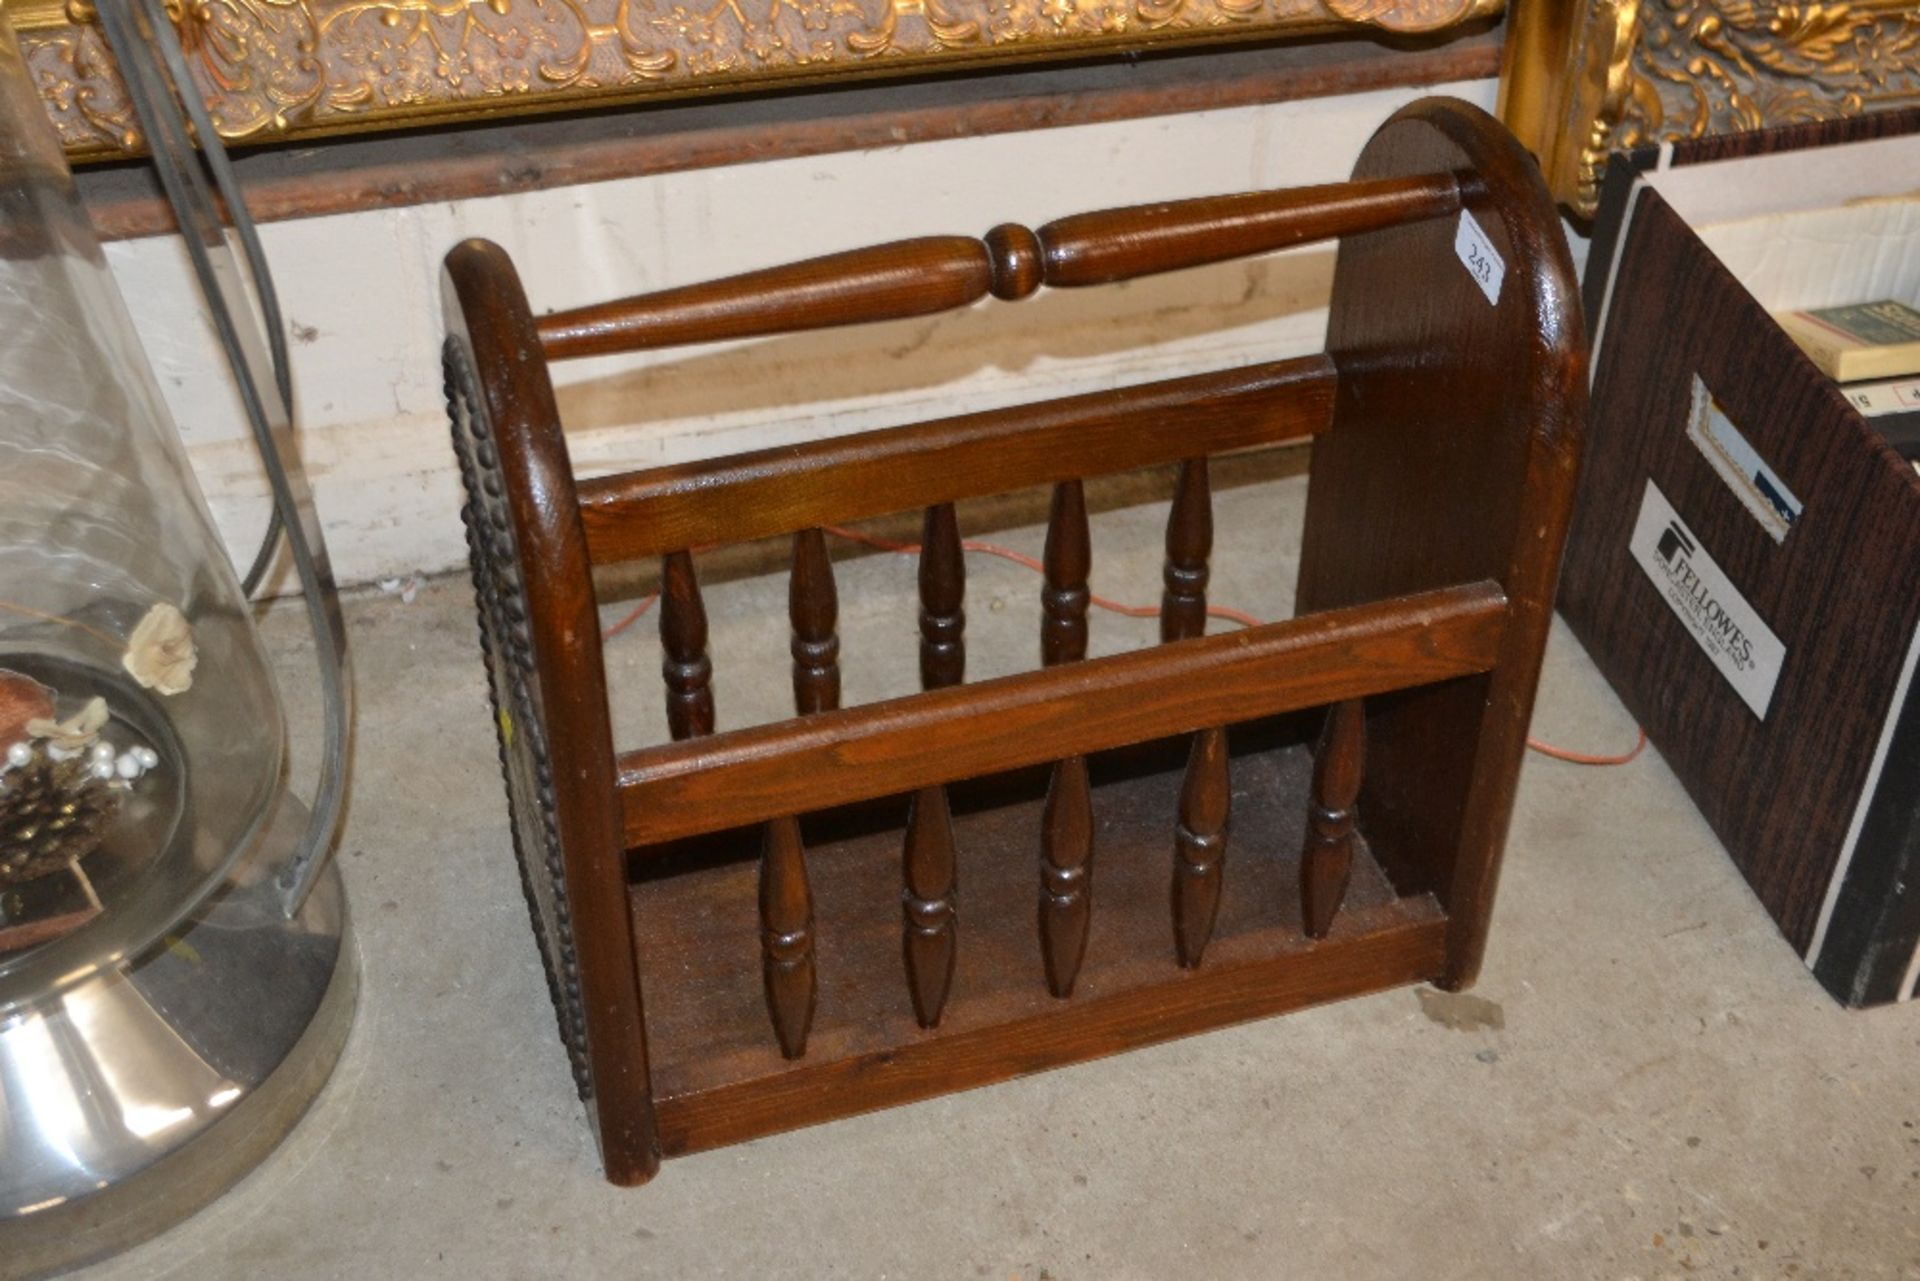 A wooden and brass mounted magazine rack